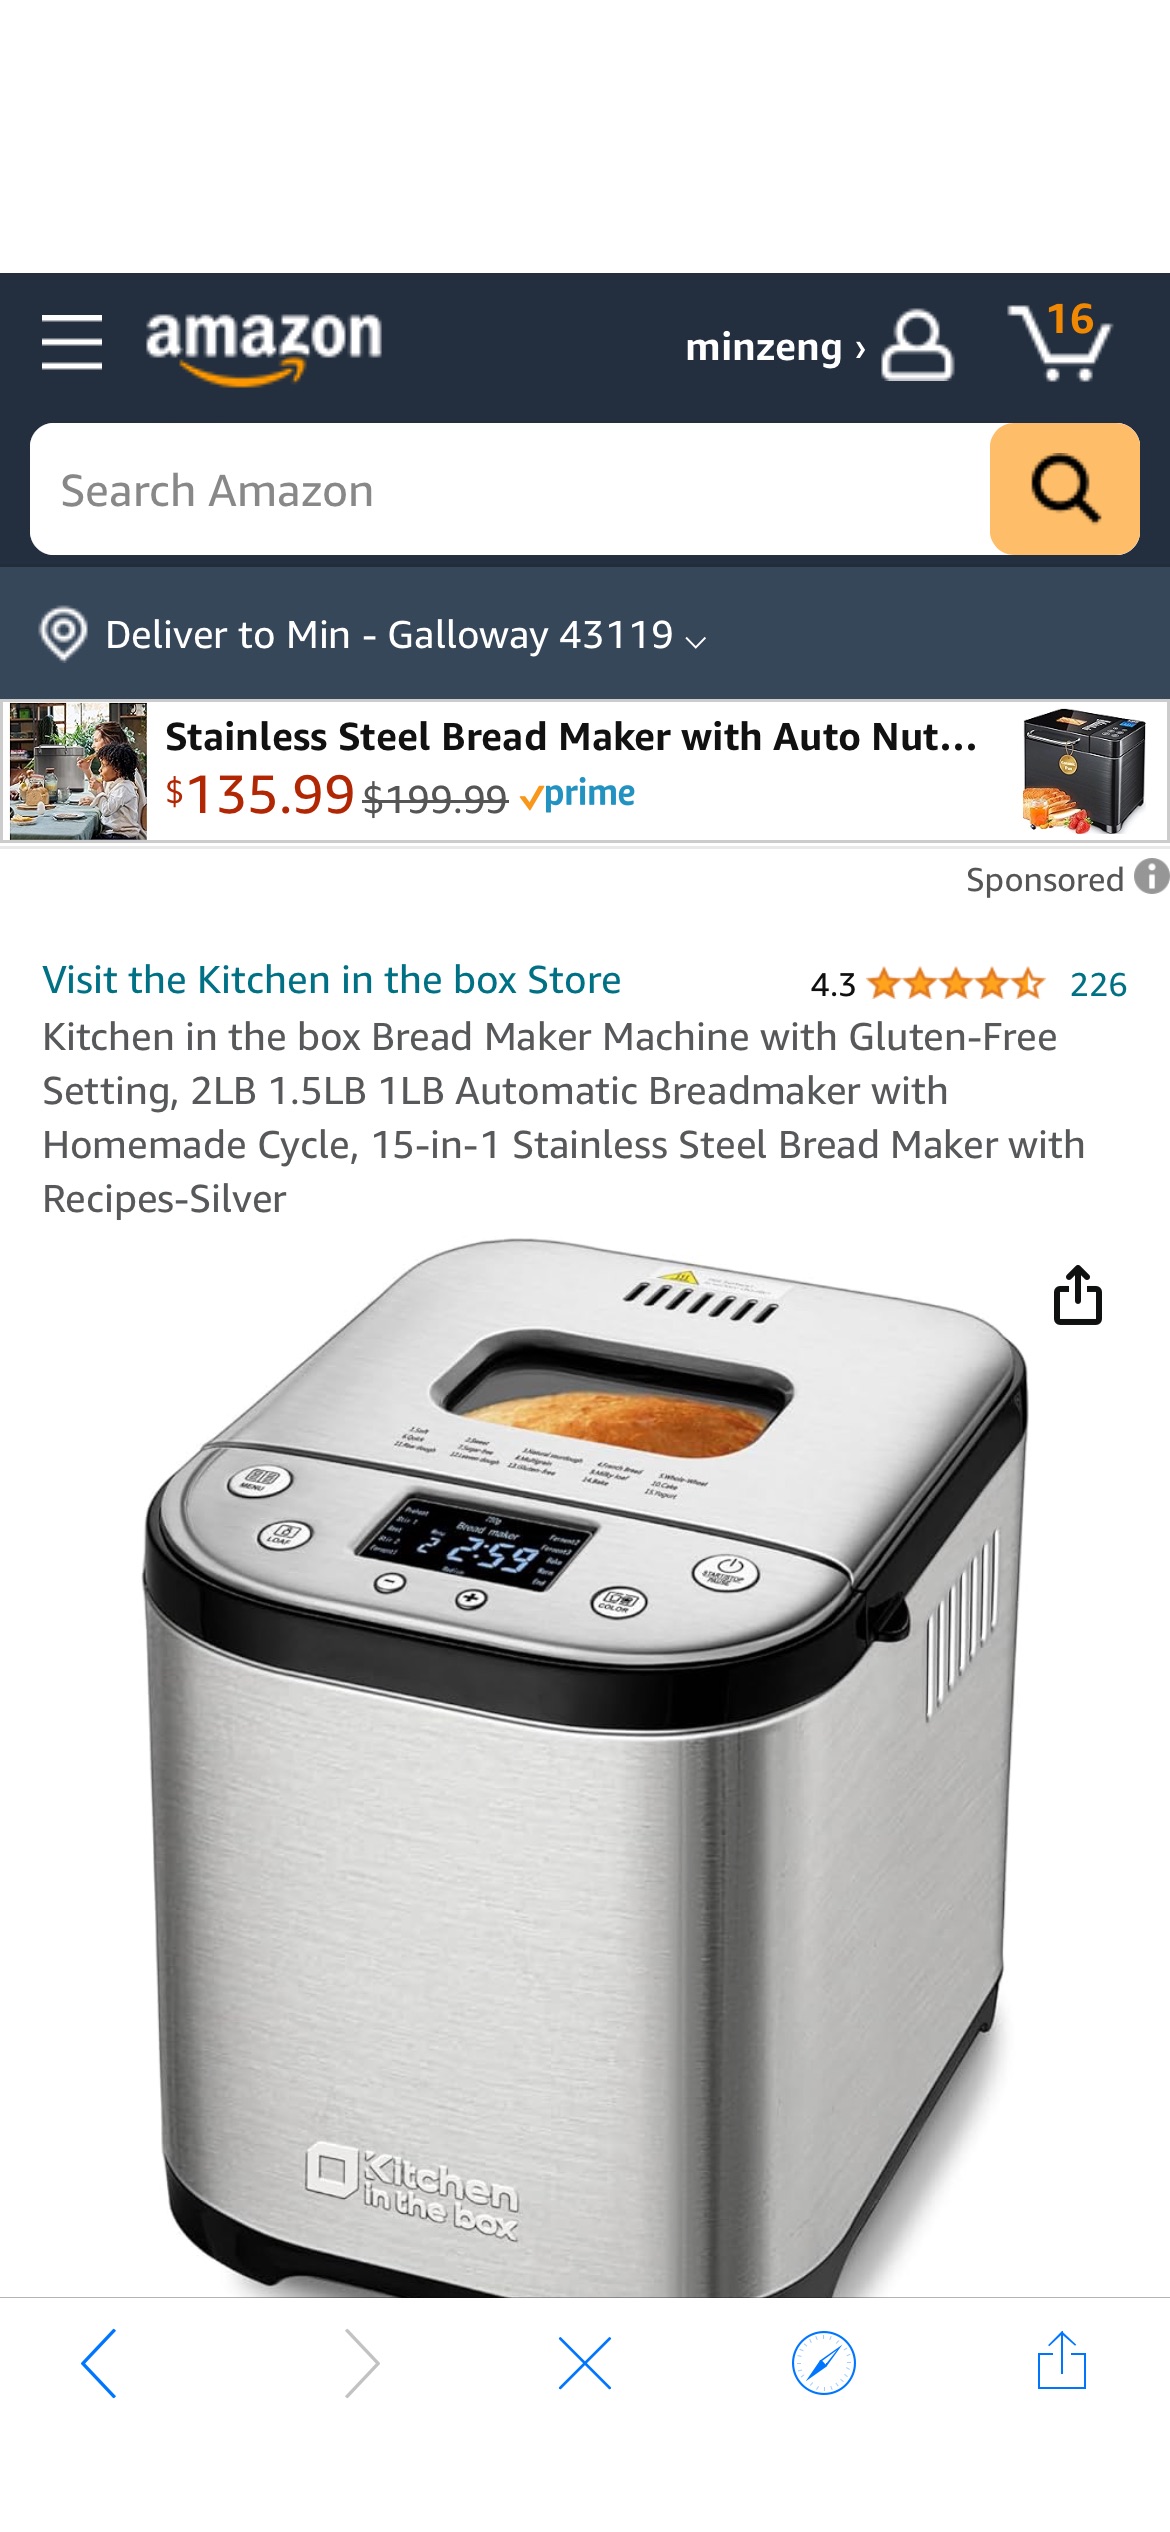 Amazon.com: Kitchen in the box Bread Maker Machine with Gluten-Free Setting, 2LB 1.5LB 1LB Automatic Breadmaker with Homemade Cycle, 15-in-1 Stainless Steel Bread Maker with Recipes-Silver: Home & Kit